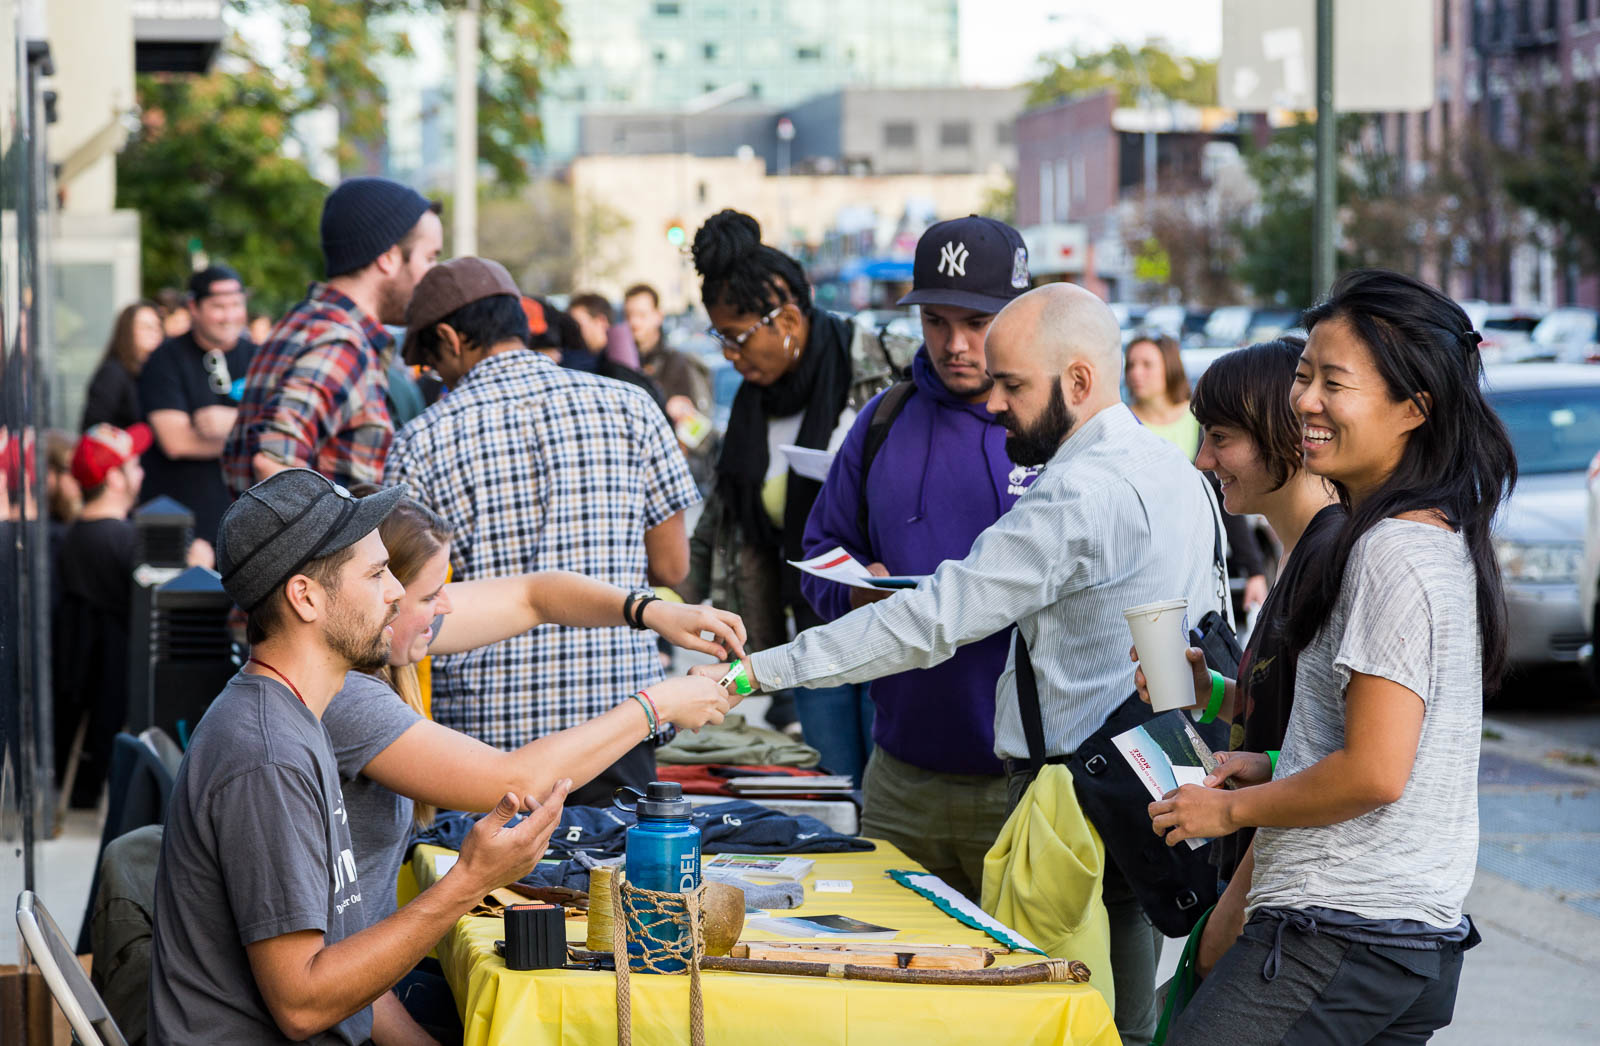  We teamed up with Patagonia to host our first-ever Job Fair! More than ten outdoor industry companies lined up on the sidewalk outside LIC to take applications and show you what your dream job could be. 